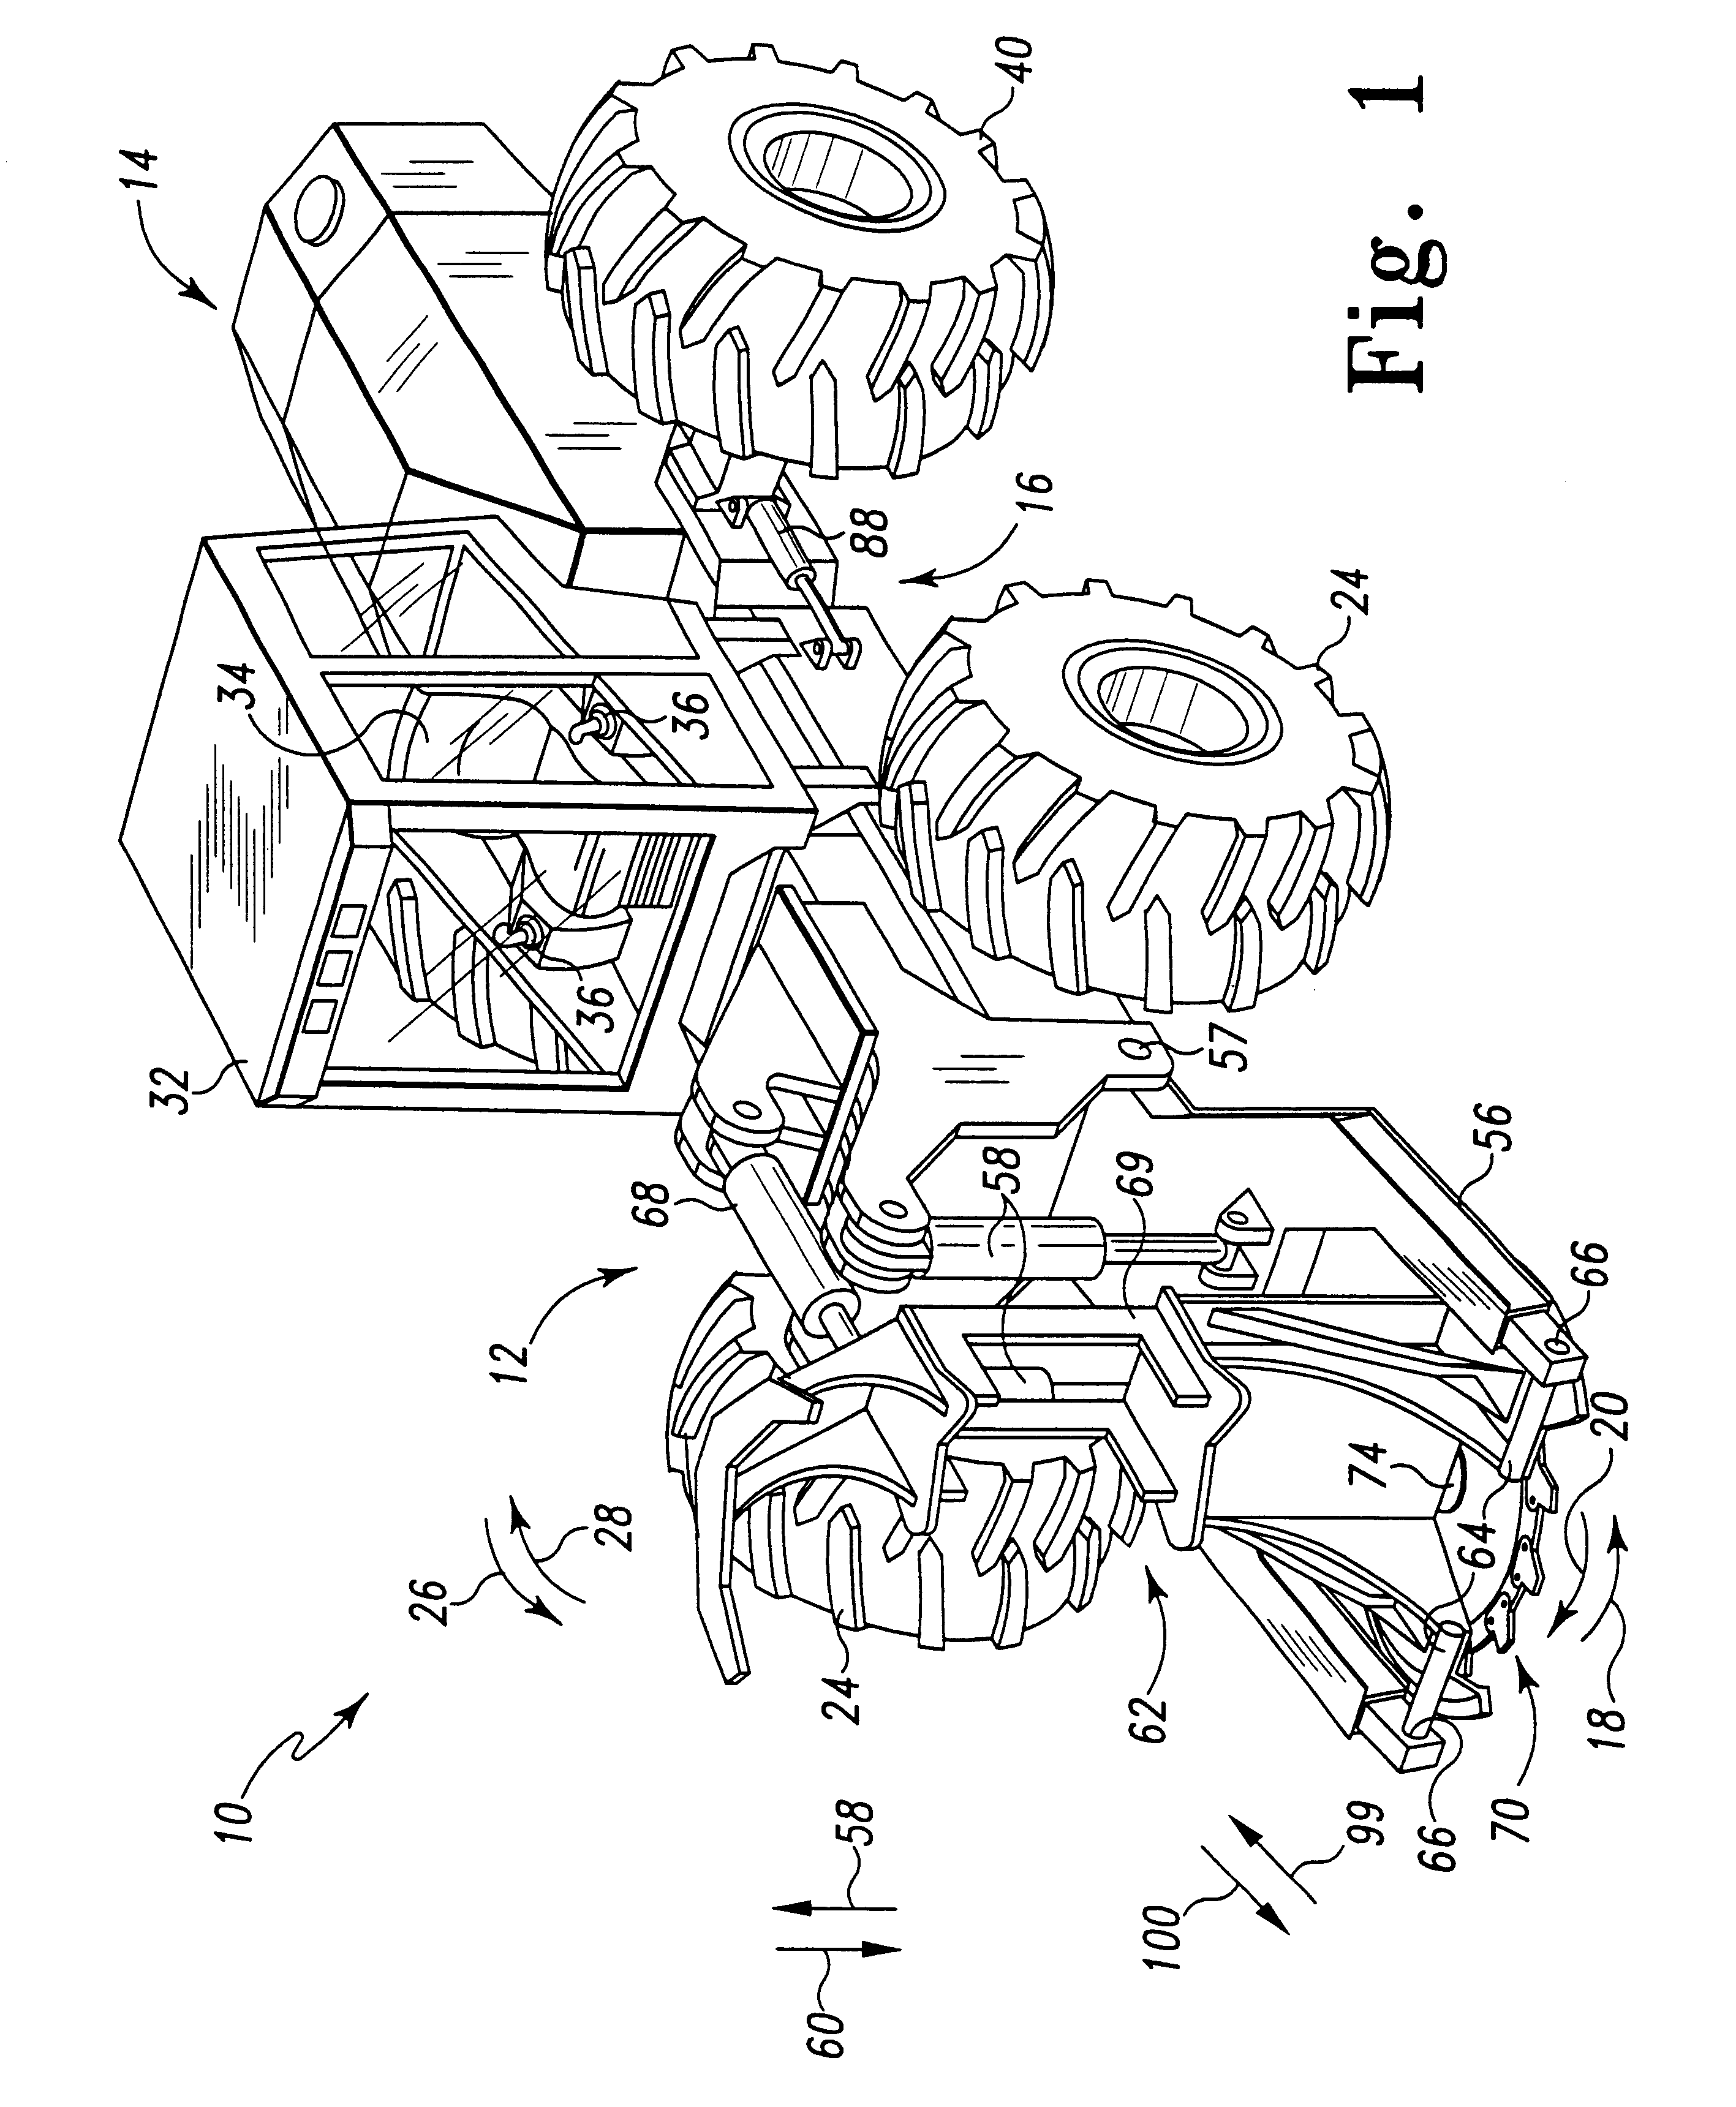 Method and apparatus for operating a hydraulic drive system of a feller-buncher